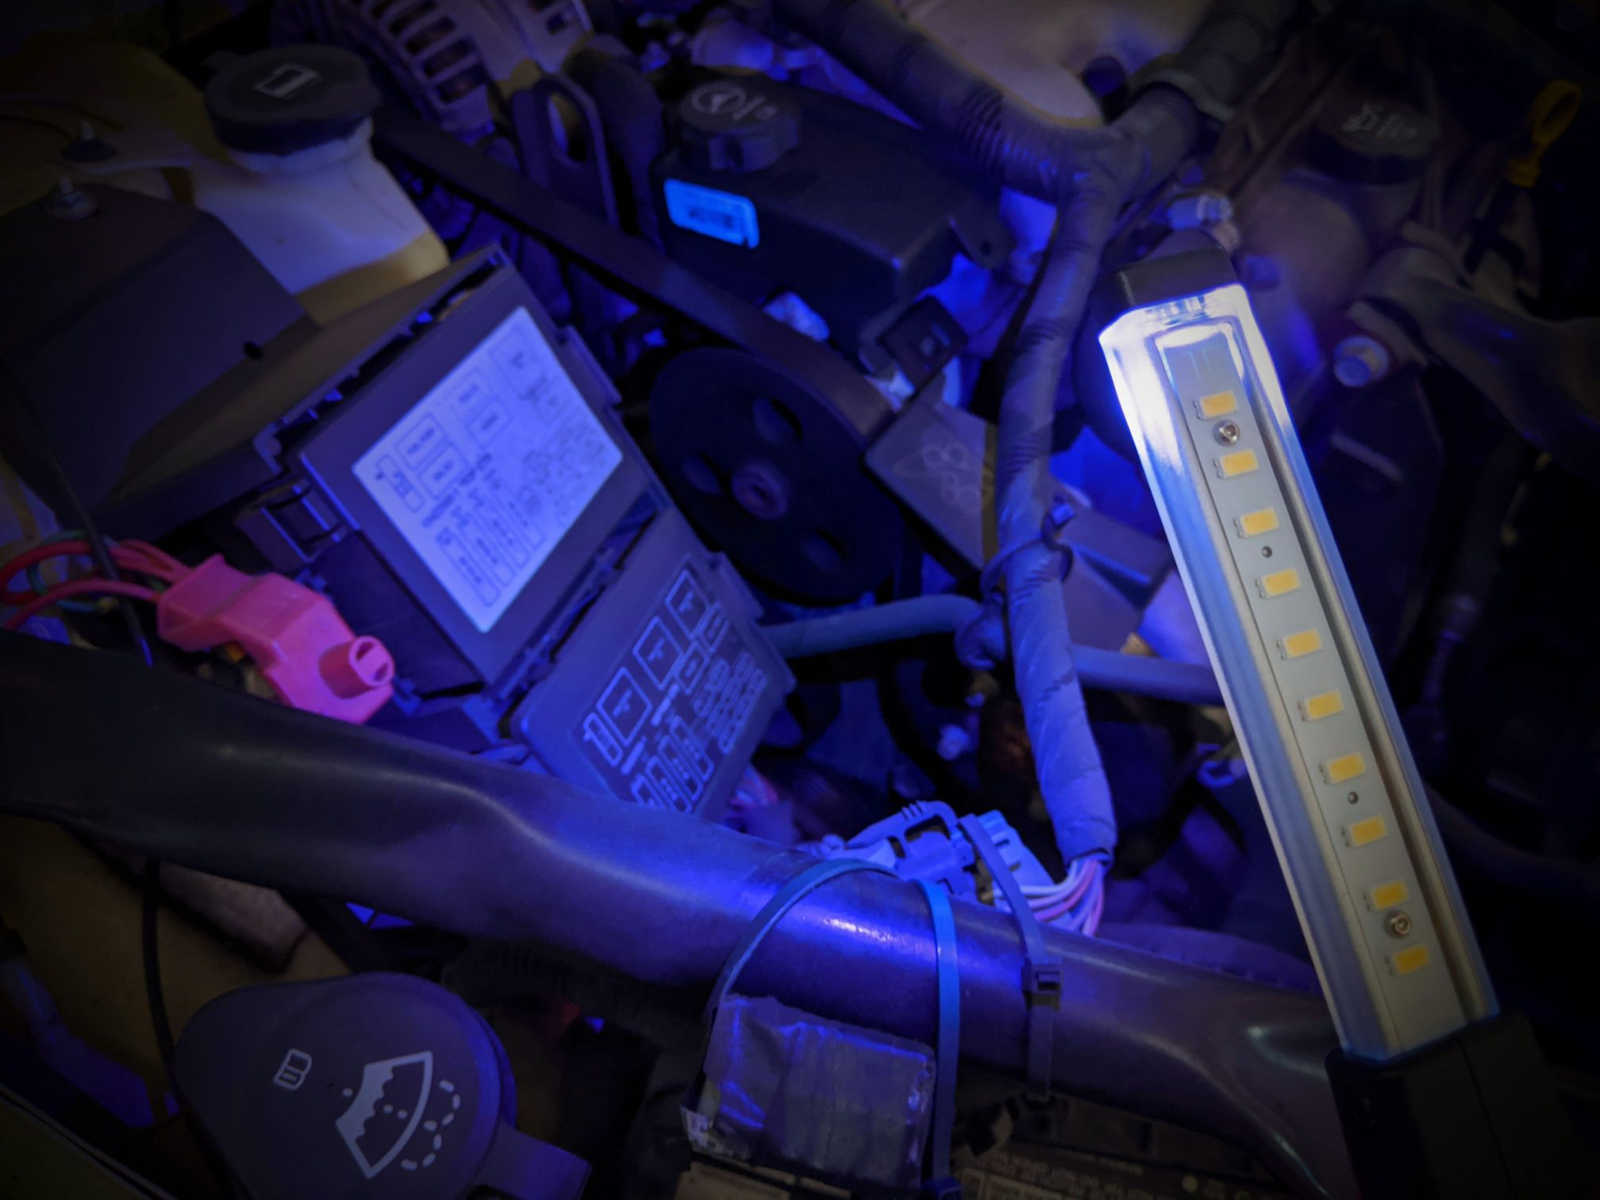 Searching for AC leaks using the UV light on the Strion Switchblade